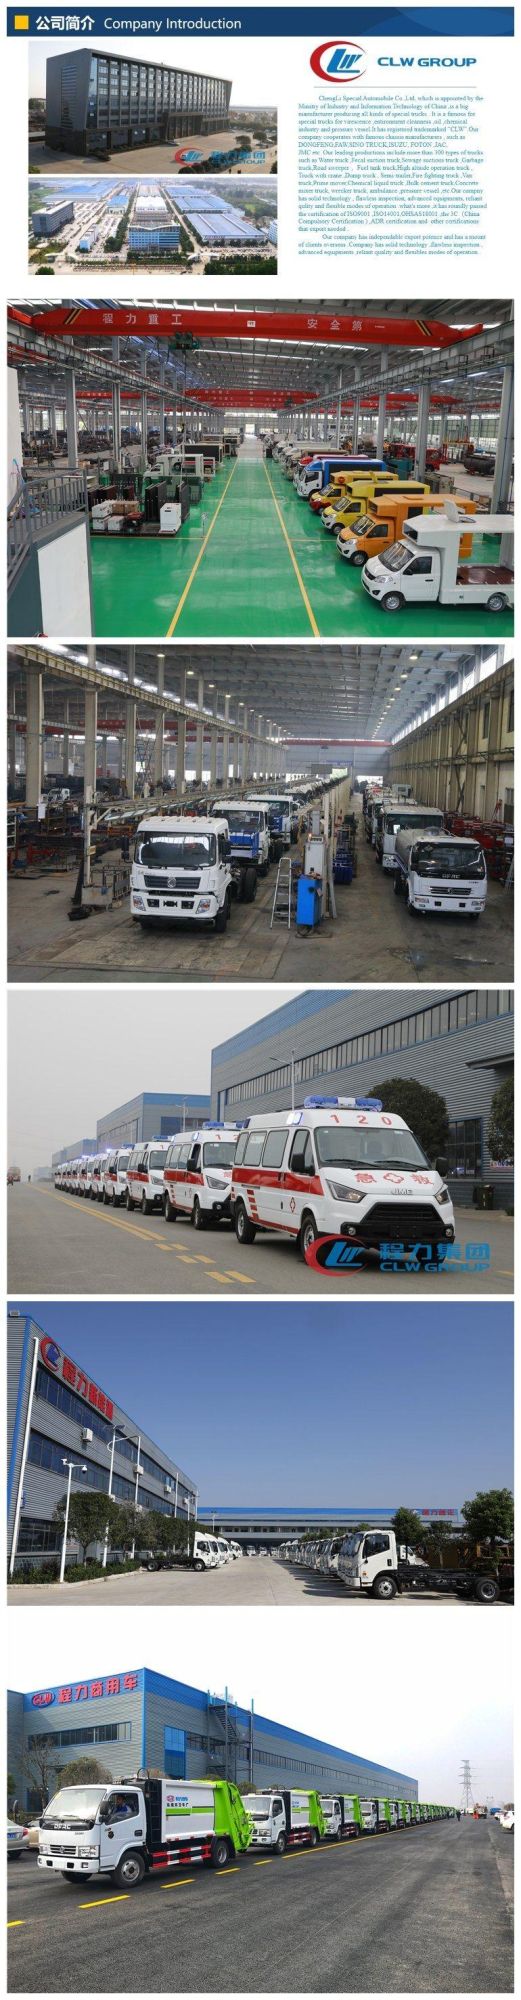 Dongfeng Fire Rescue Truck 3000 Liters Water Fire Fighting Truck, Firefighting Vehicle with Water Tanker for Sales